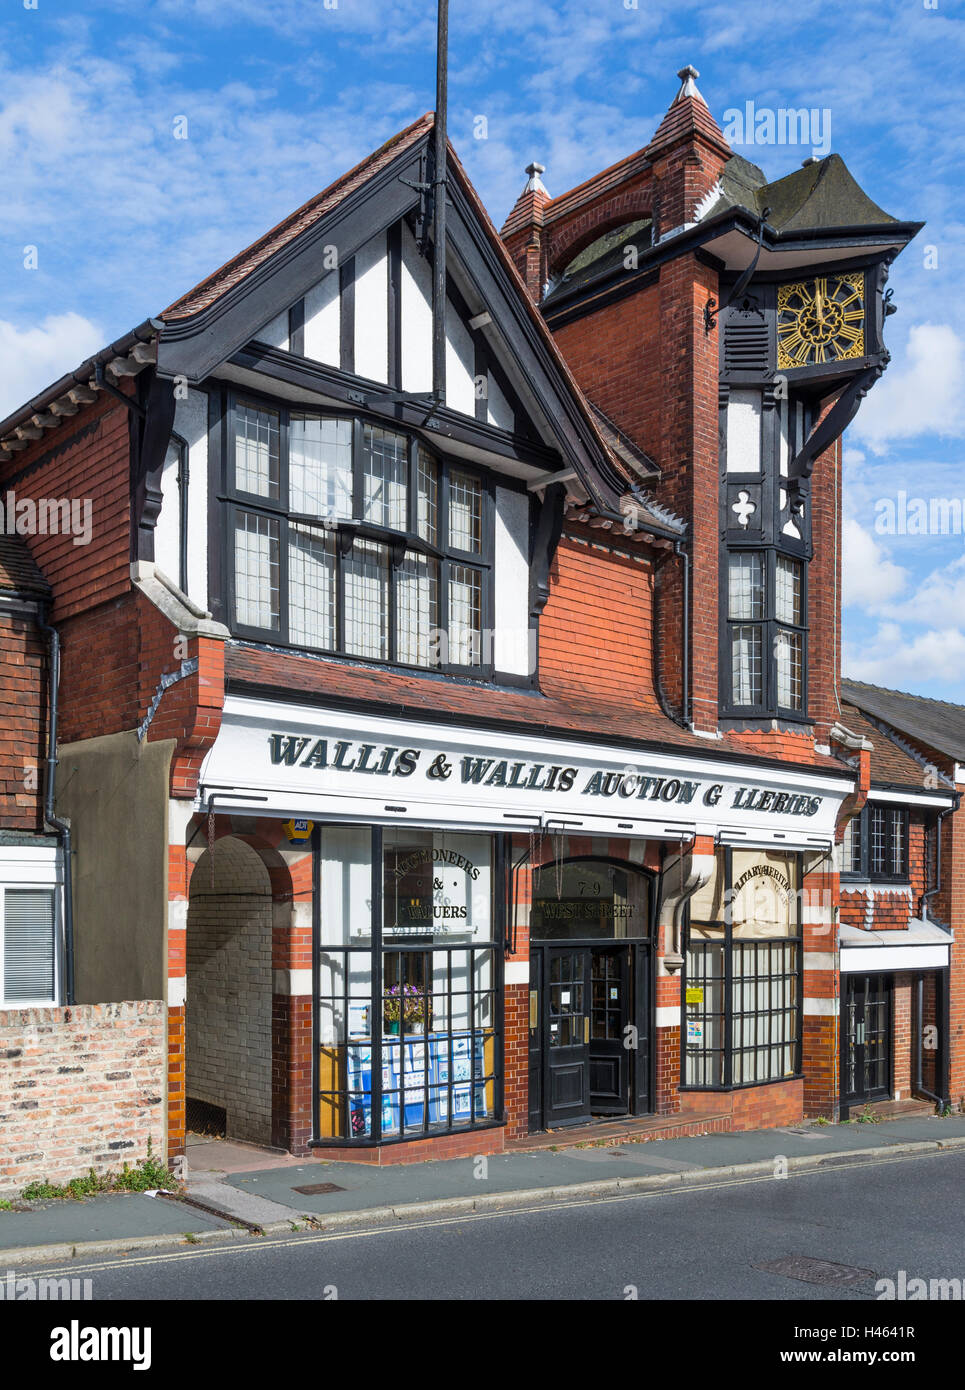 Wallis & Wallis Auction Galleries in Lewes, East Sussex, England, UK. Stock Photo